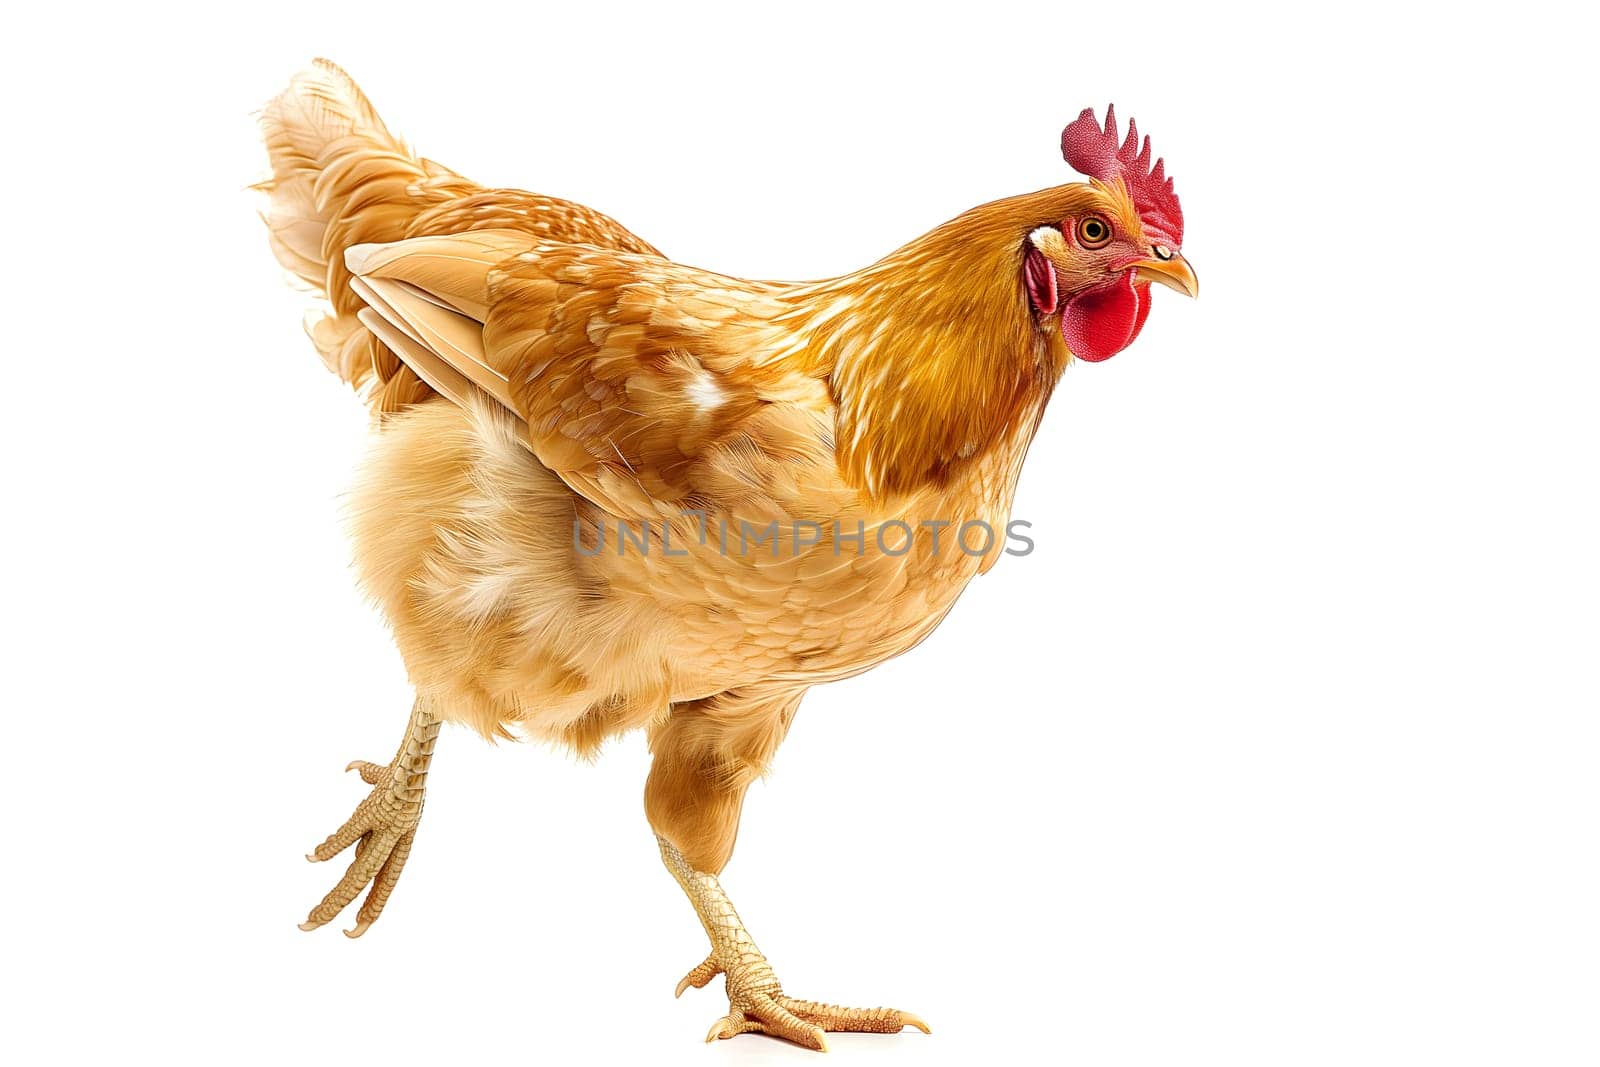 Running chicken hen on white background. Neural network generated image. Not based on any actual scene or pattern.